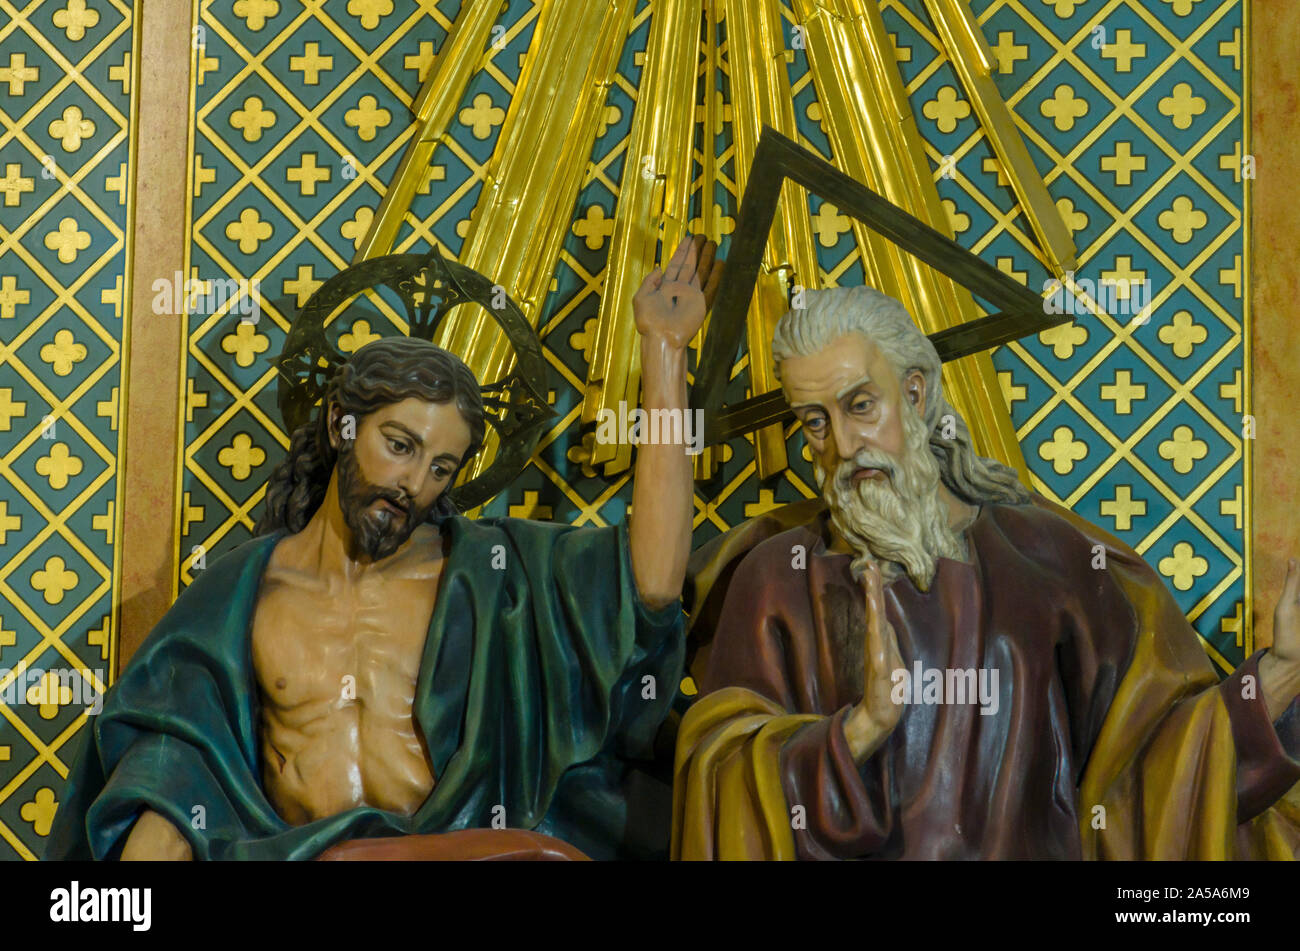 Madrid, Spain, 17 th September 2019. View of a religious sculpture in the Almudena Cathedral, Madrid city, Spain. Credit: Enrique Davó Stock Photo